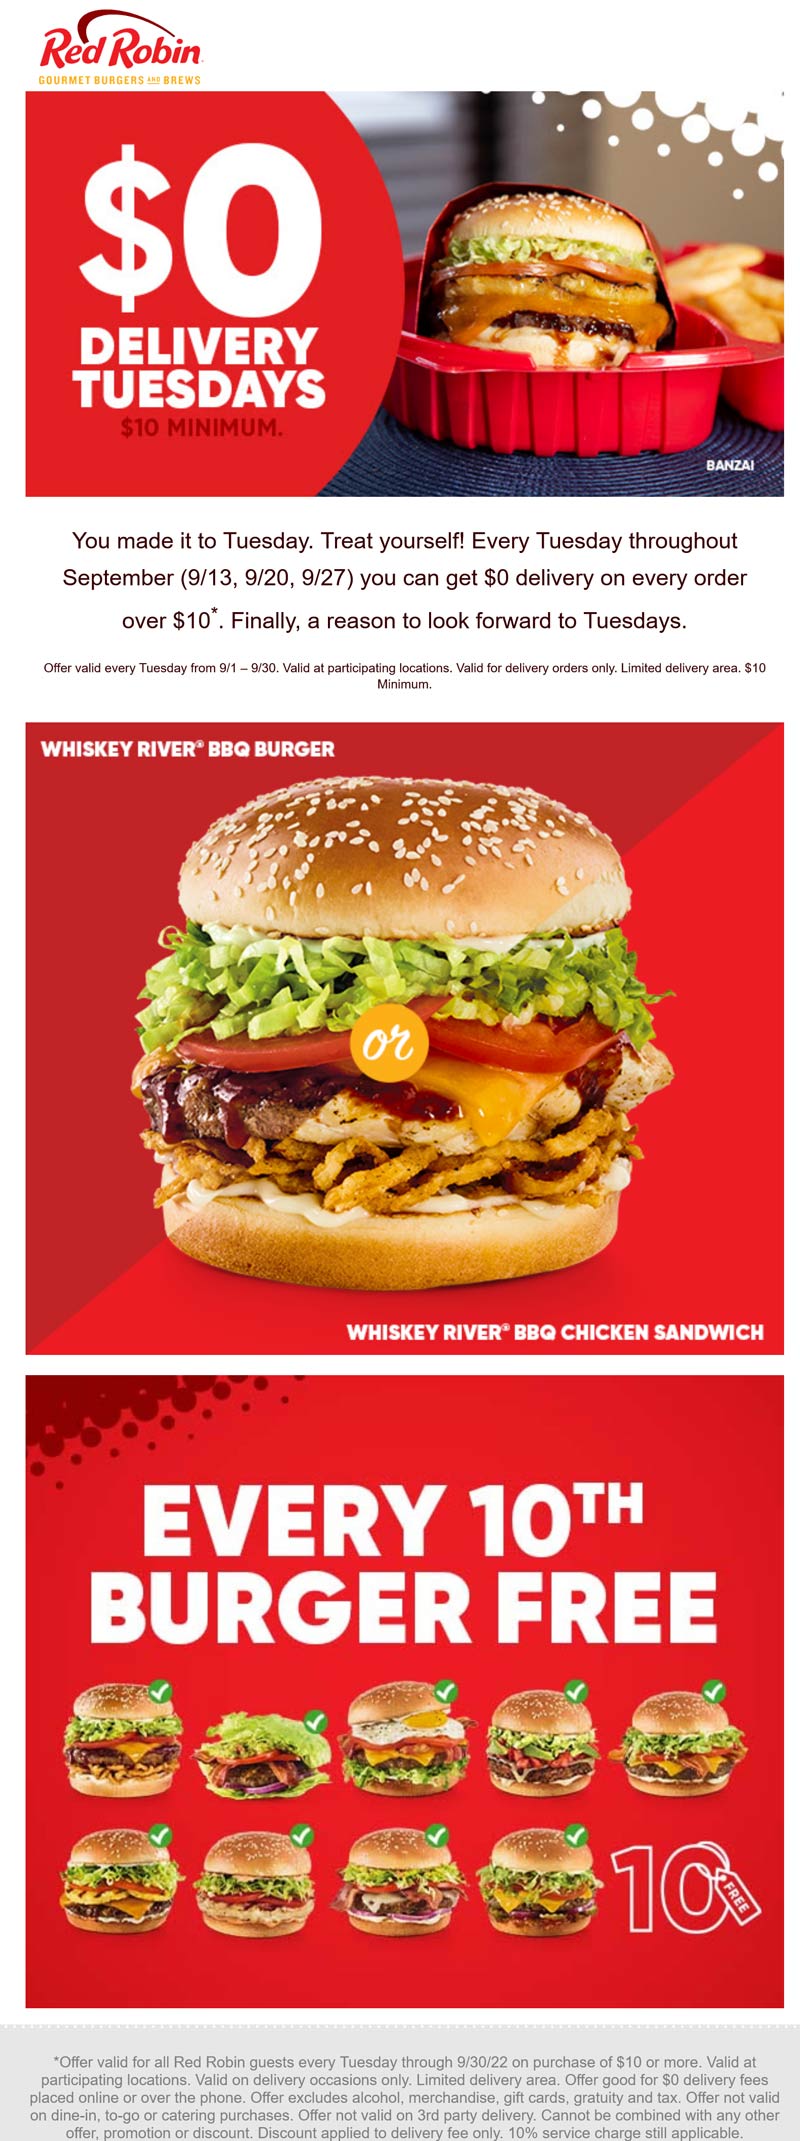 Red Robin restaurants Coupon  $0 delivery on $10+ Tuesdays all month at Red Robin restaurants #redrobin 